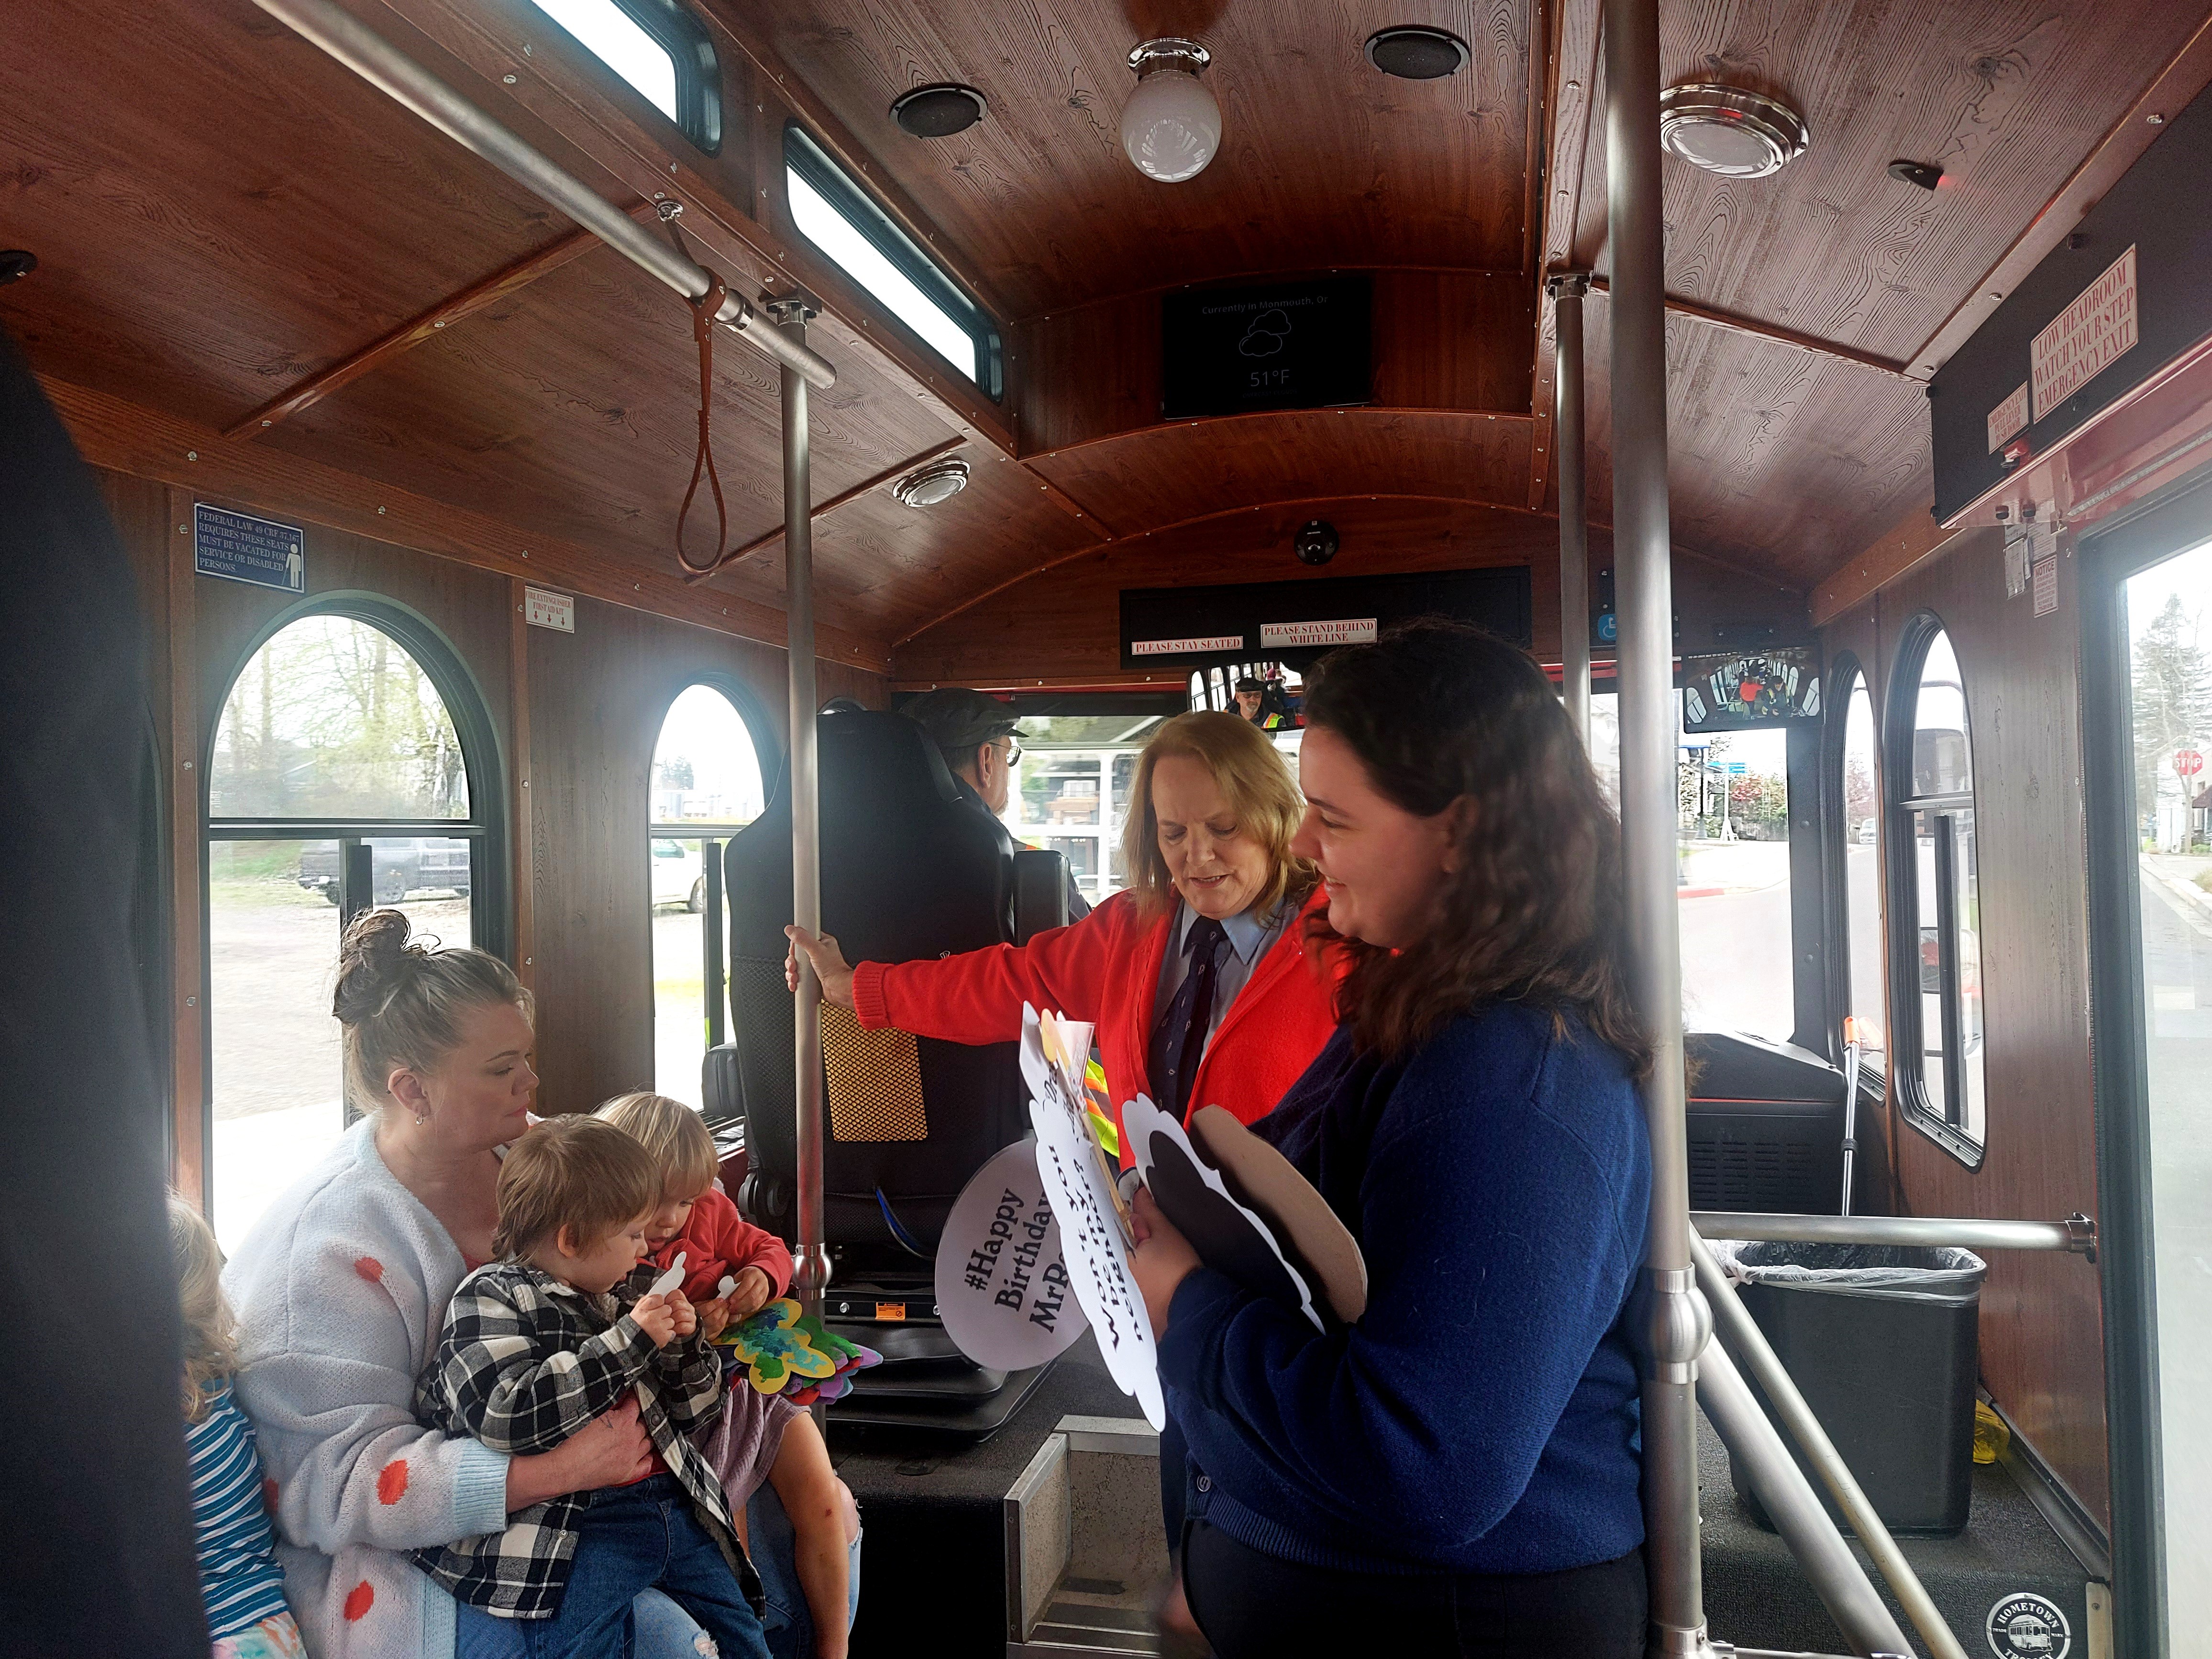 Roxanne Beltz and Laura Scully chat with riders inside the trolley